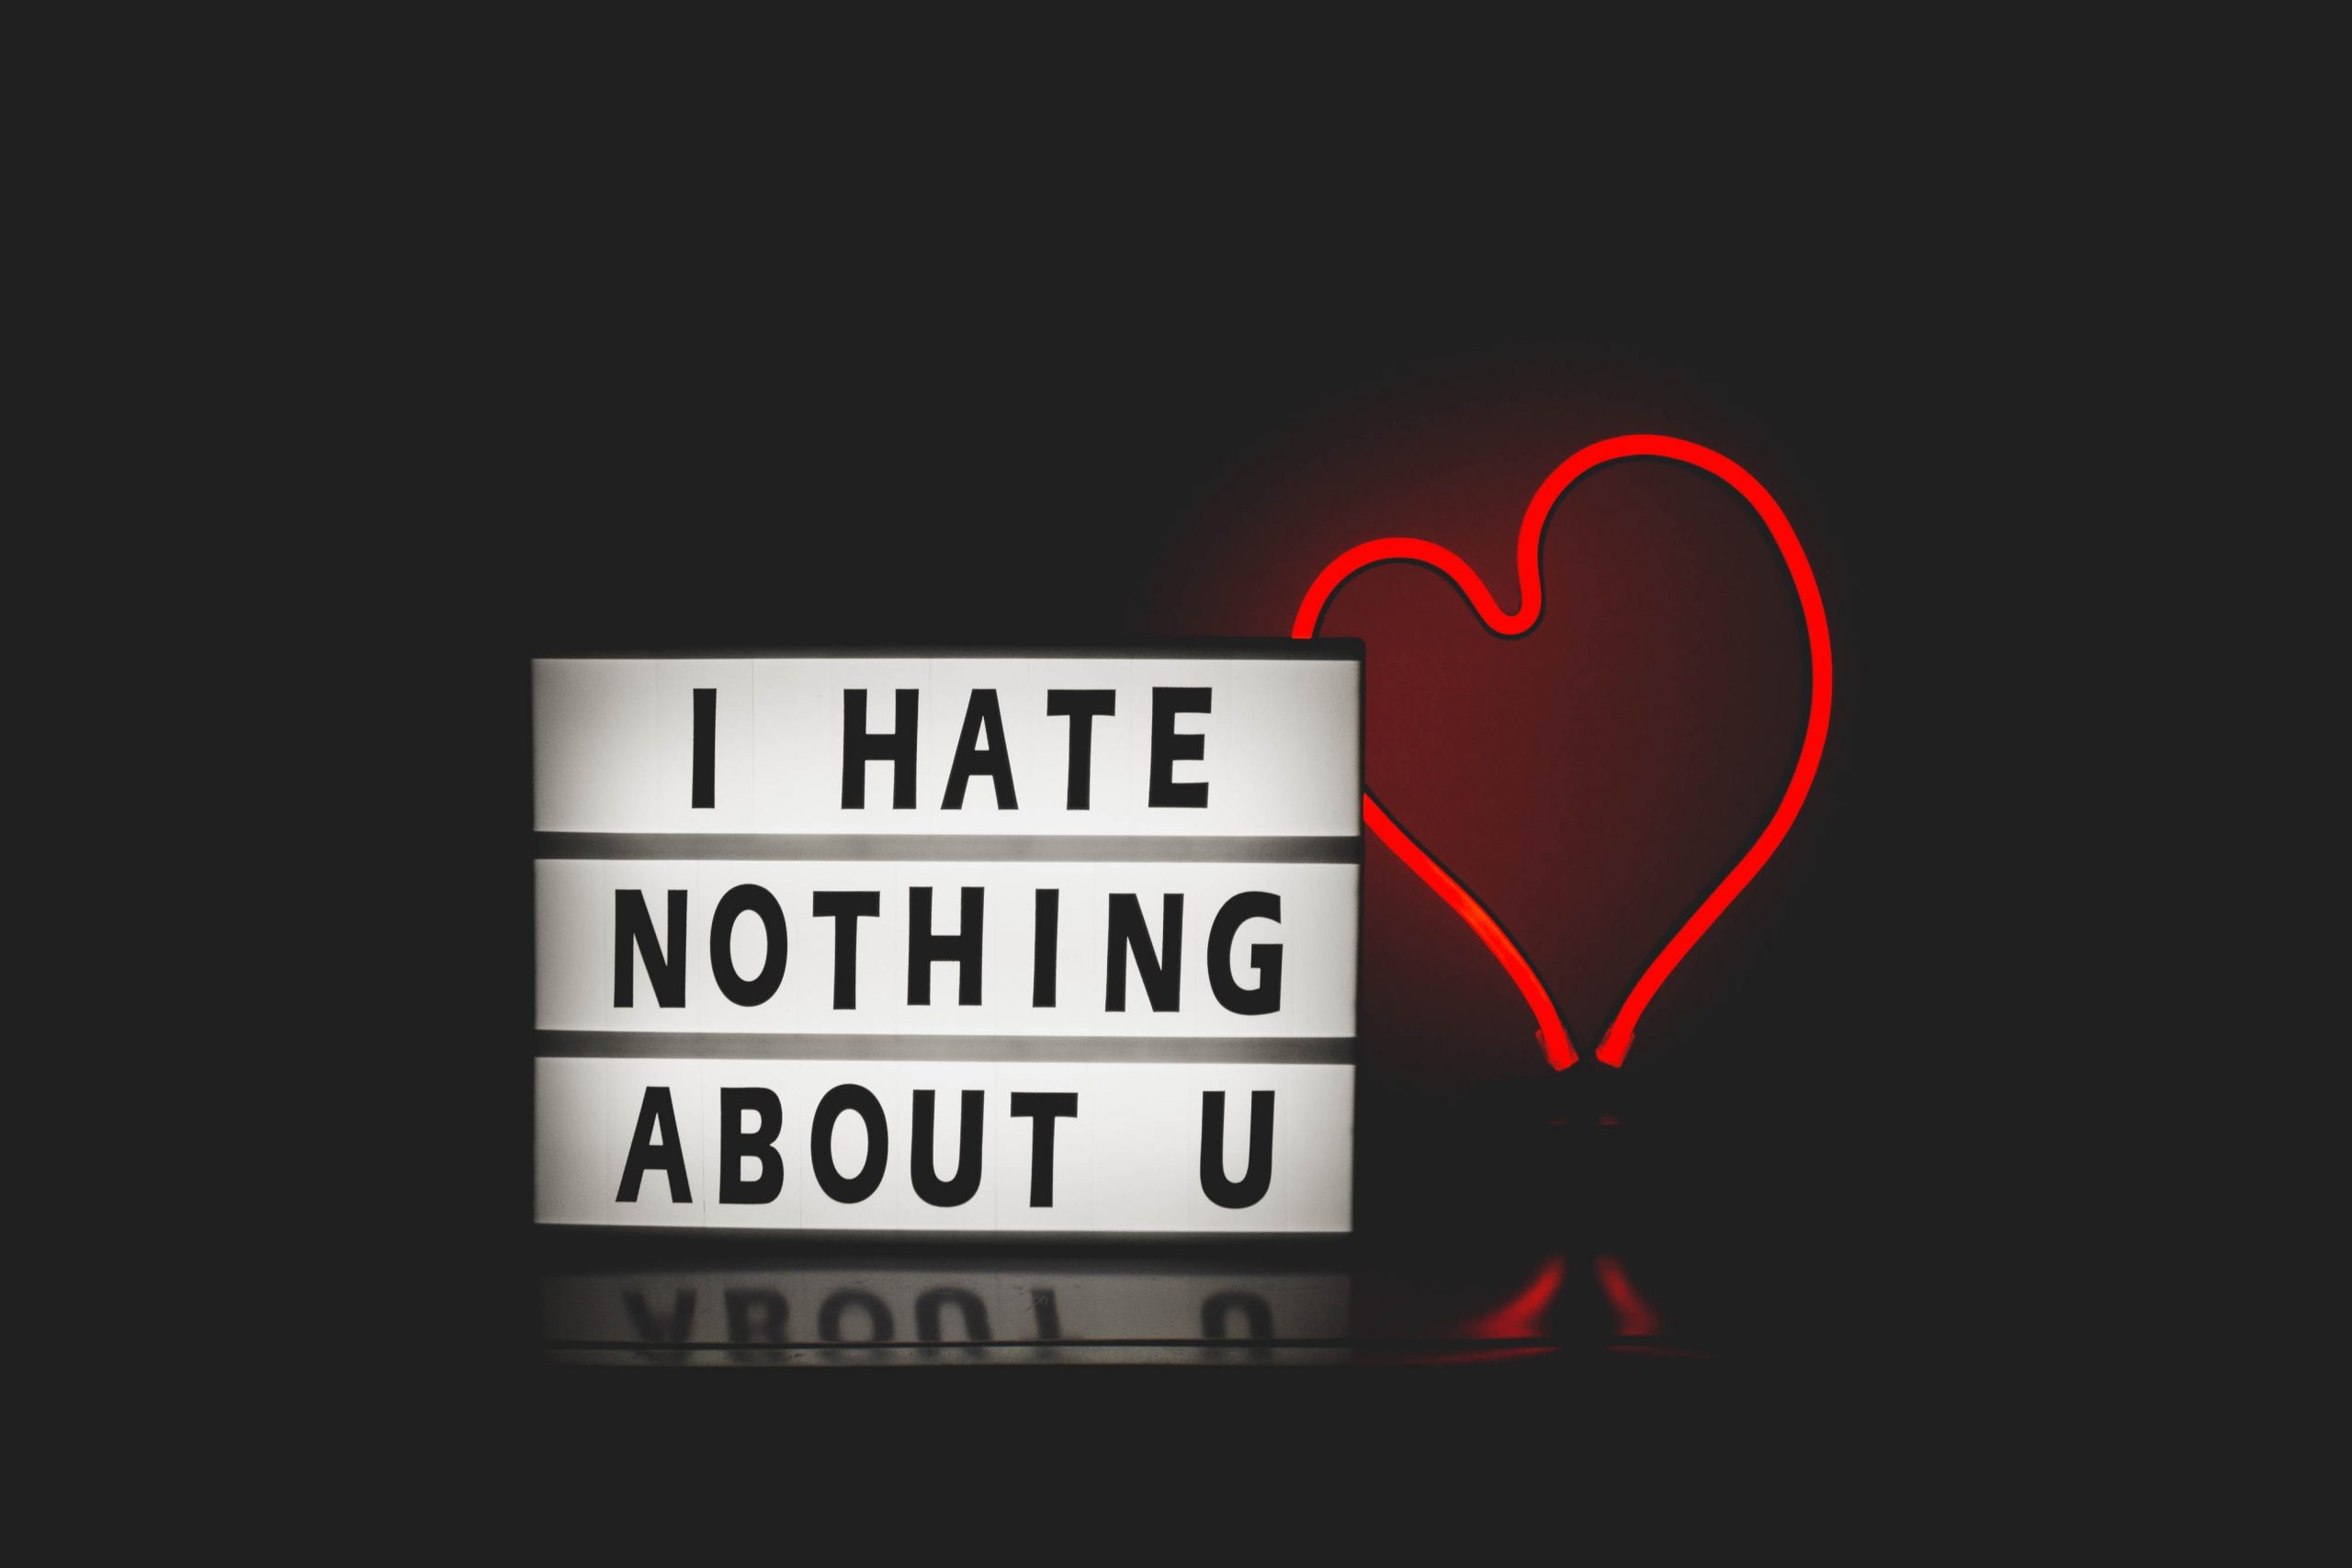 i-hate-nothing-about-you-with-red-heart-light-887353